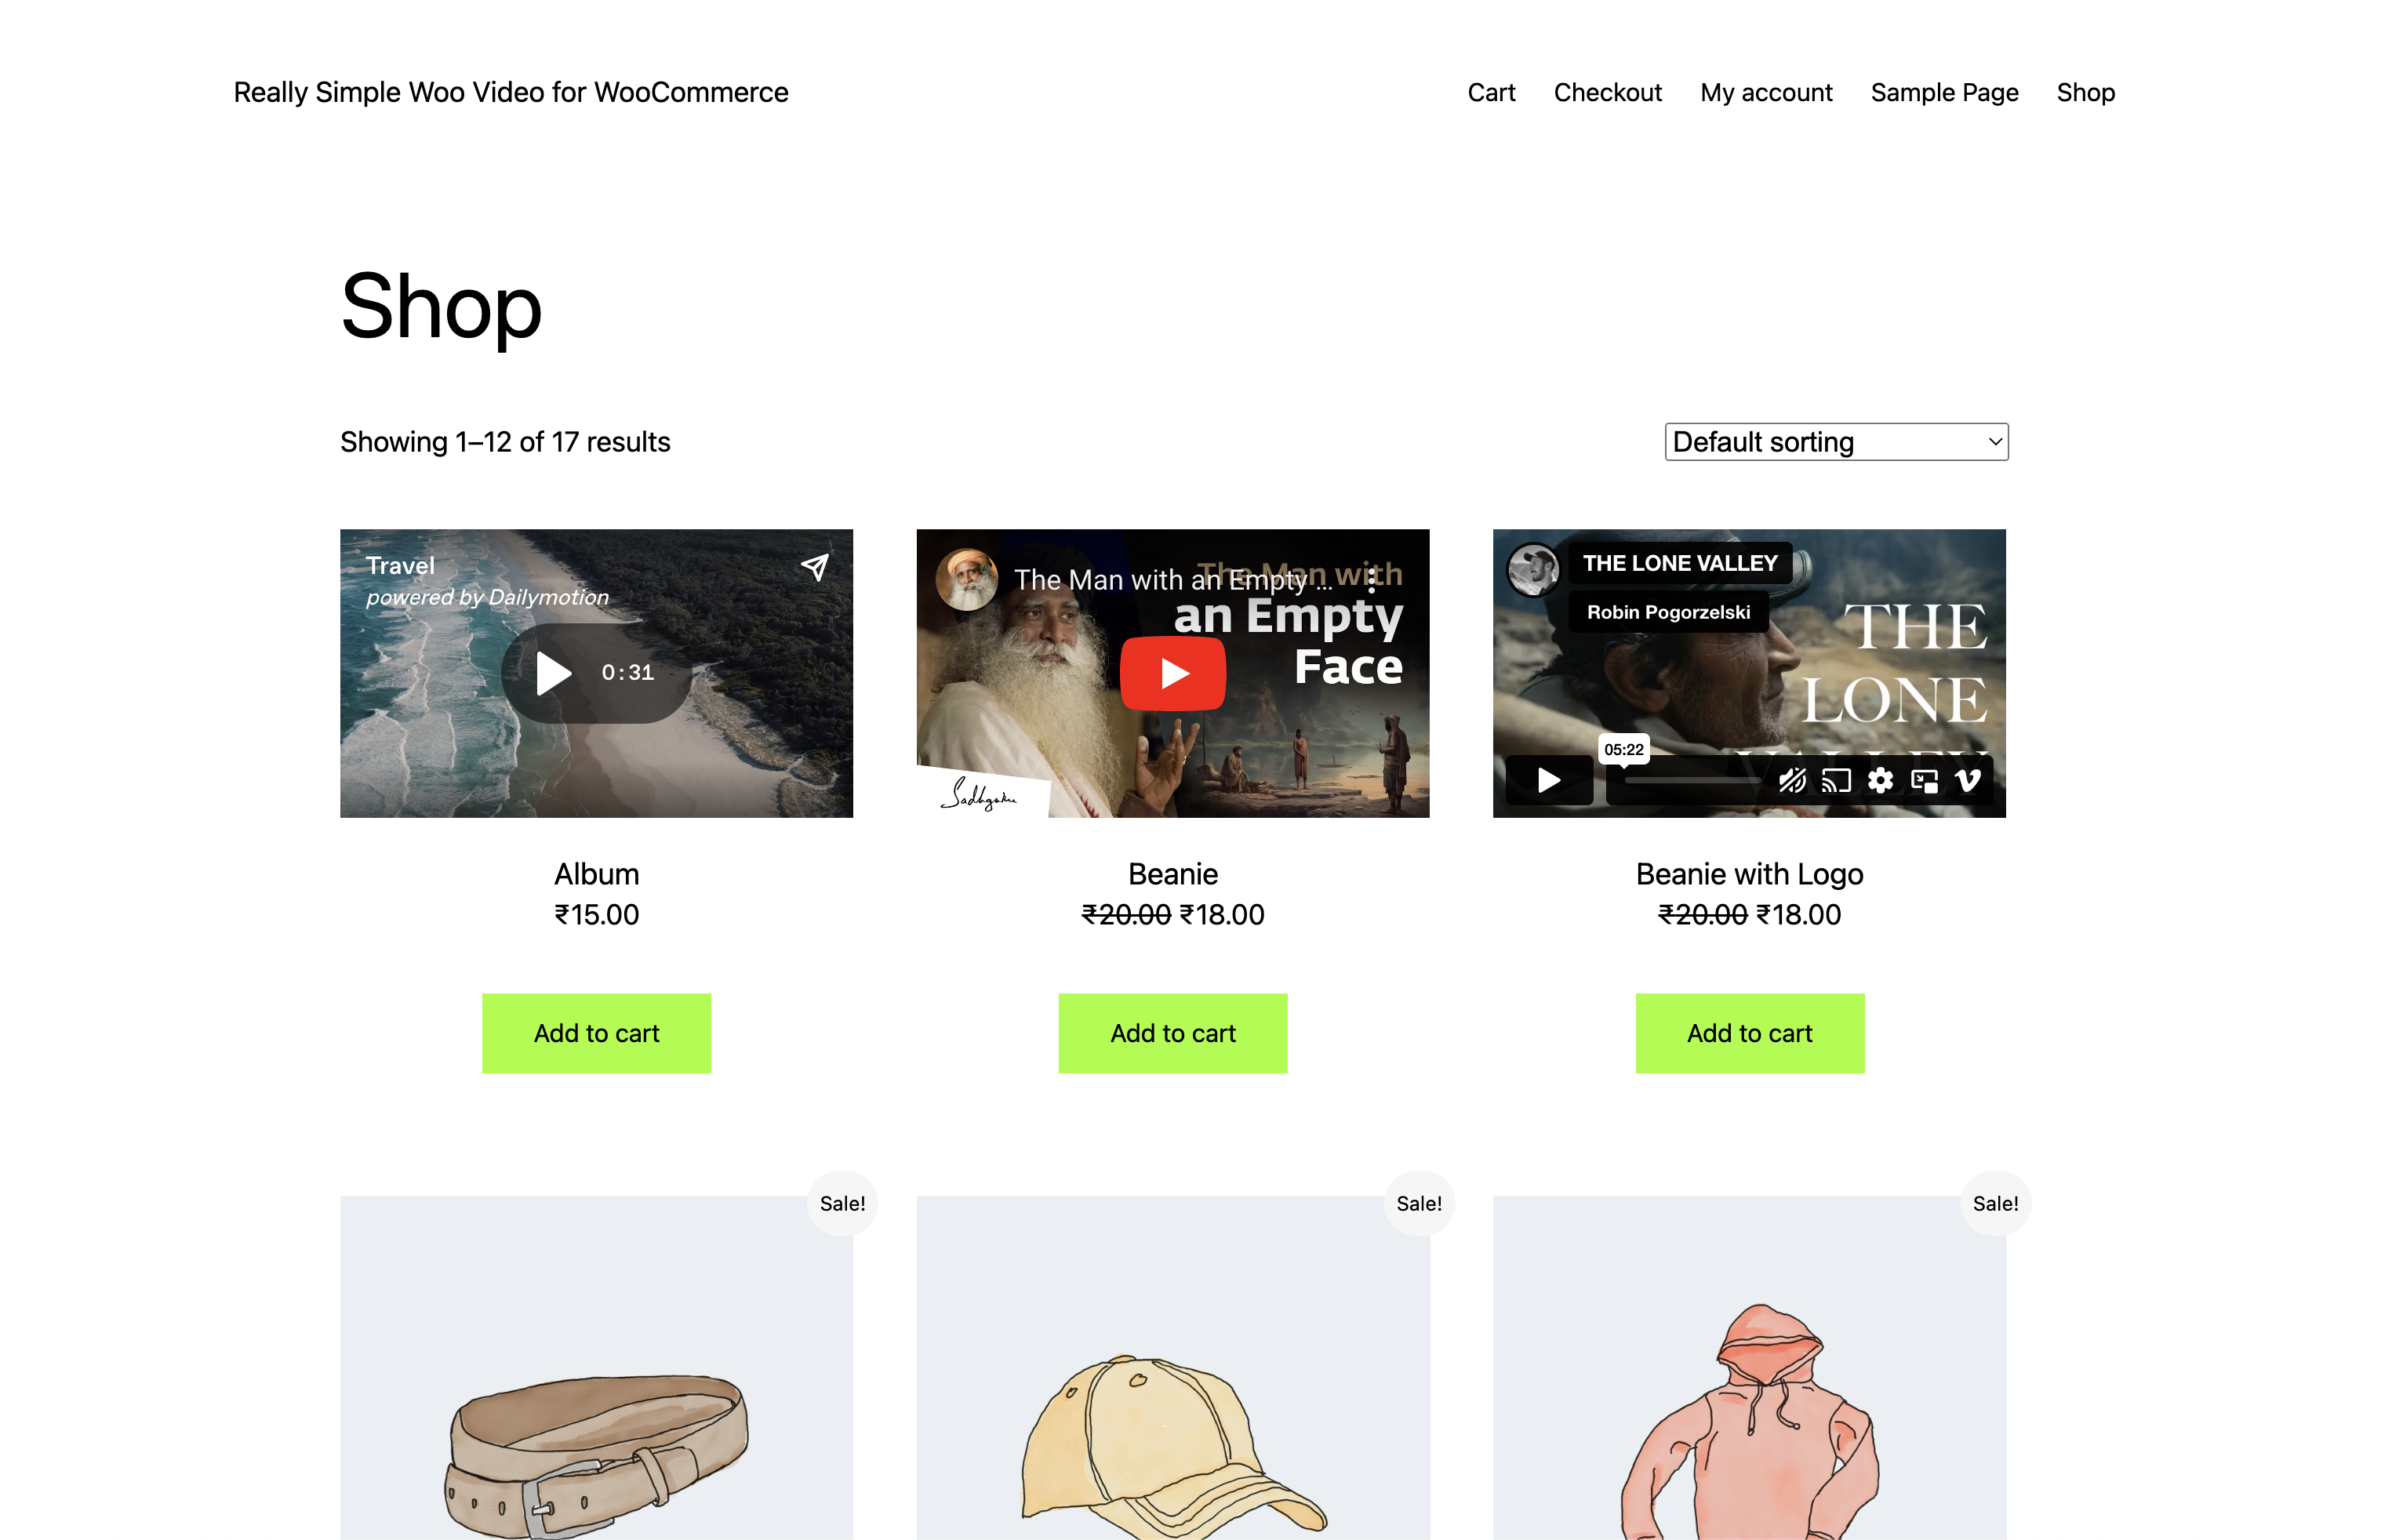 Embedded videos with Really Simple Featured Video for WooCommerce